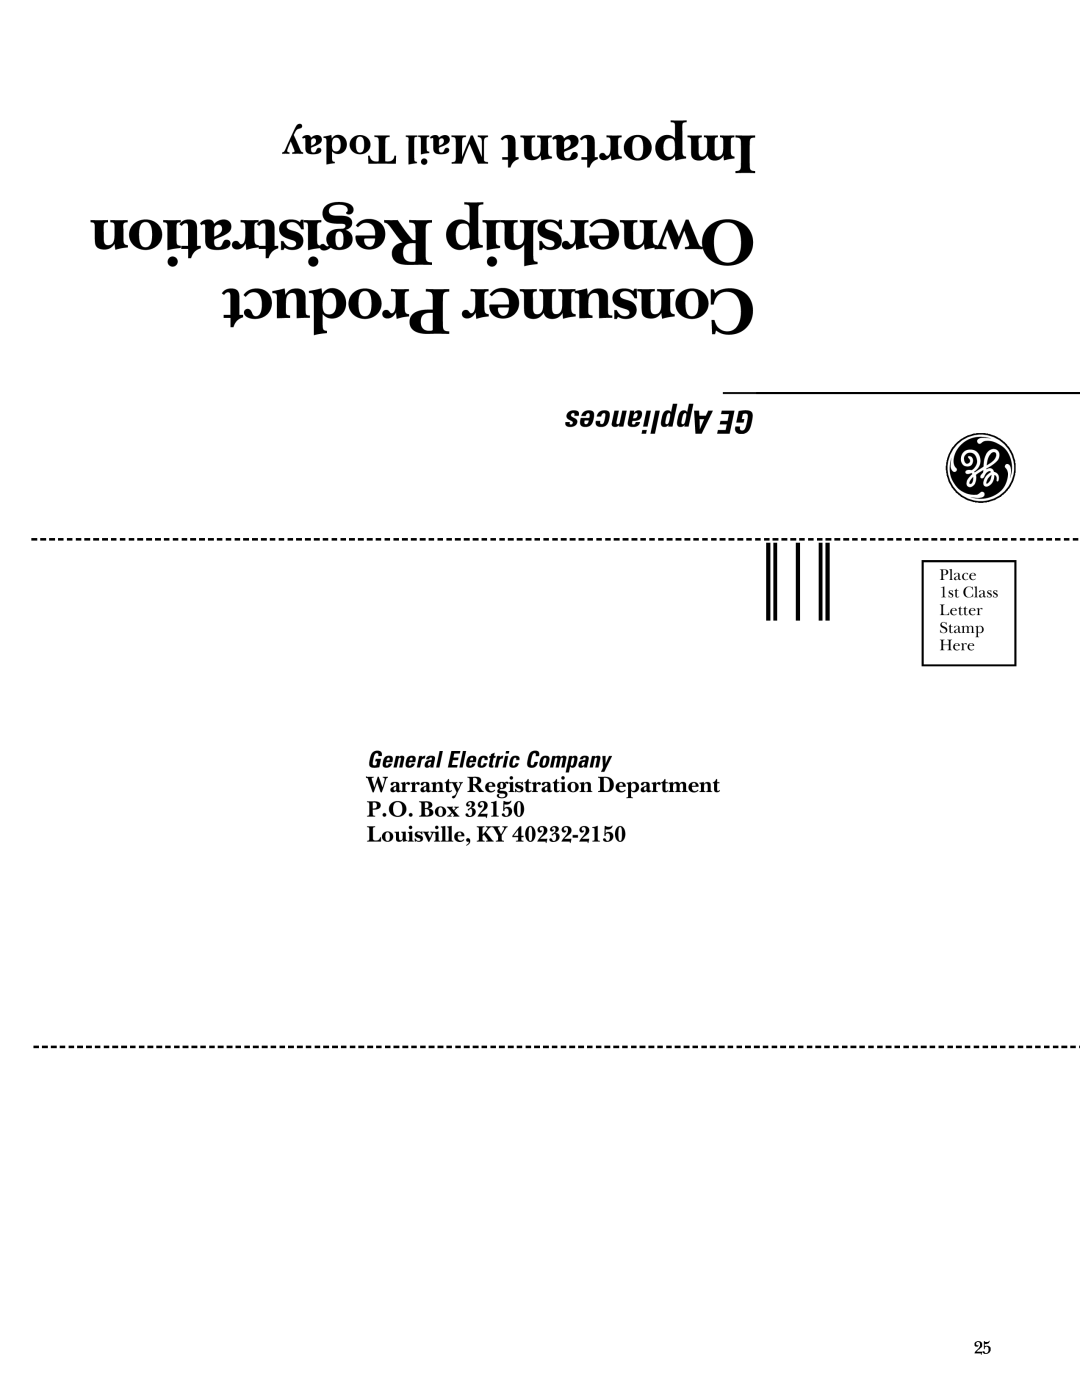 GE Monogram 48 Built-In Refrigerators manual Today Mail Important, Registration Ownership Product Consumer, Appliances GE 